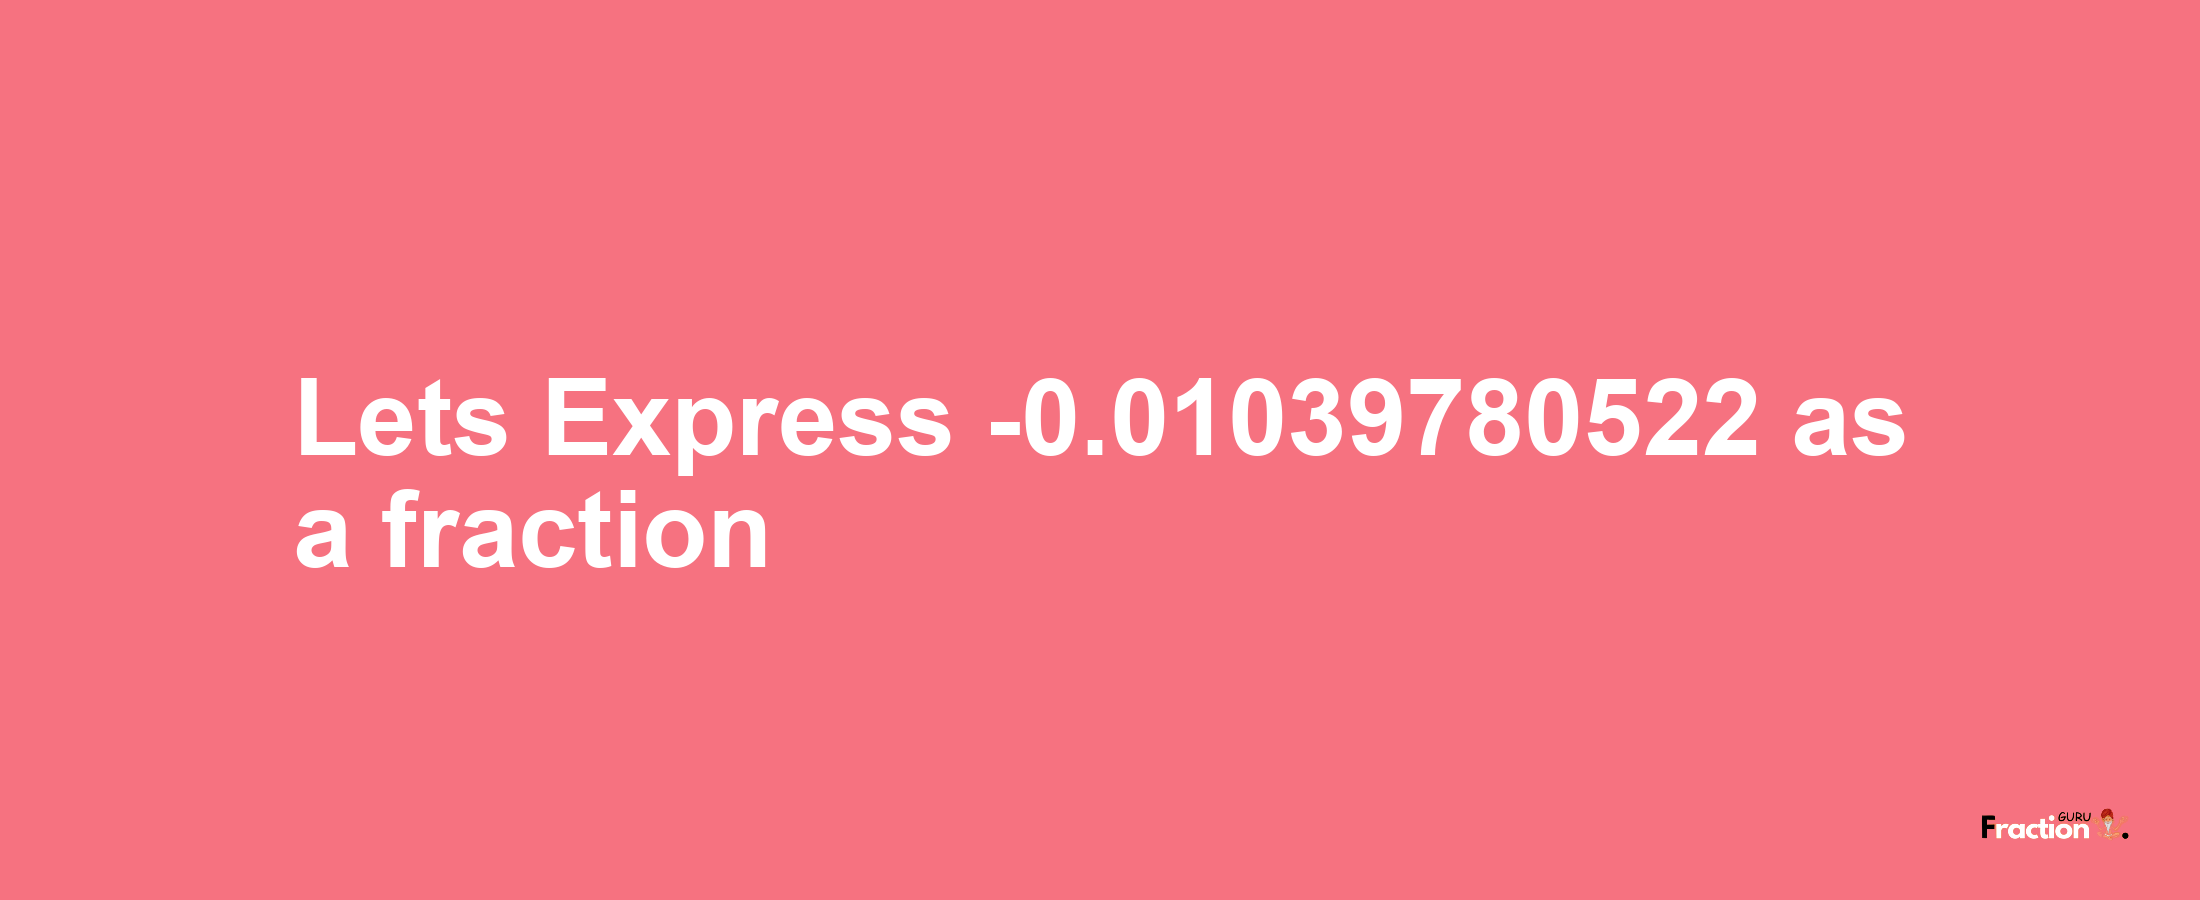 Lets Express -0.01039780522 as afraction